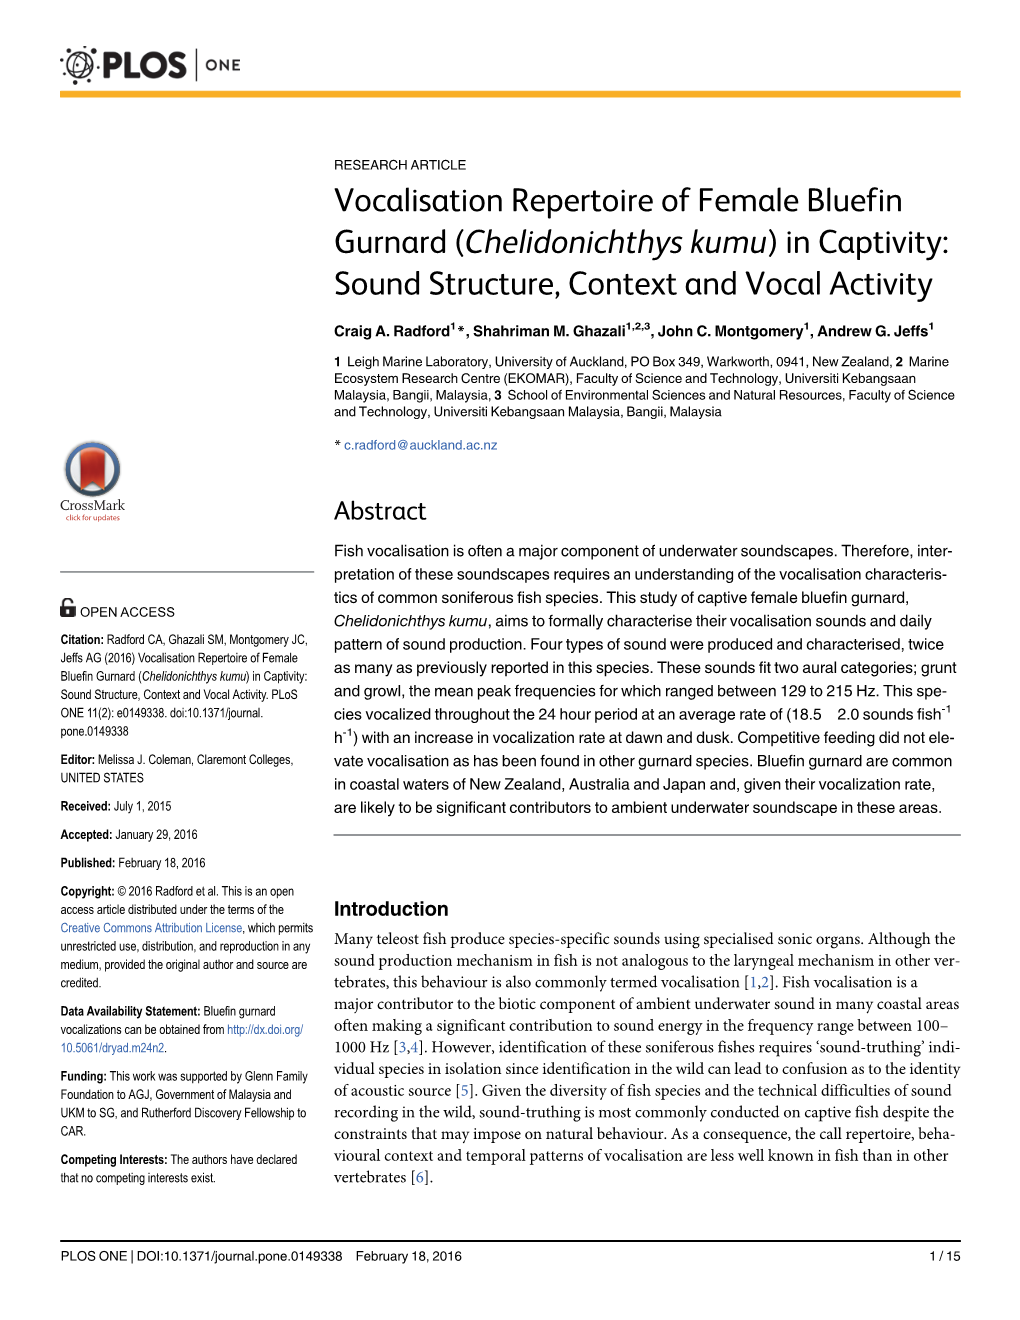 Vocalisation Repertoire of Female Bluefin Gurnard (Chelidonichthys Kumu) in Captivity: Sound Structure, Context and Vocal Activity